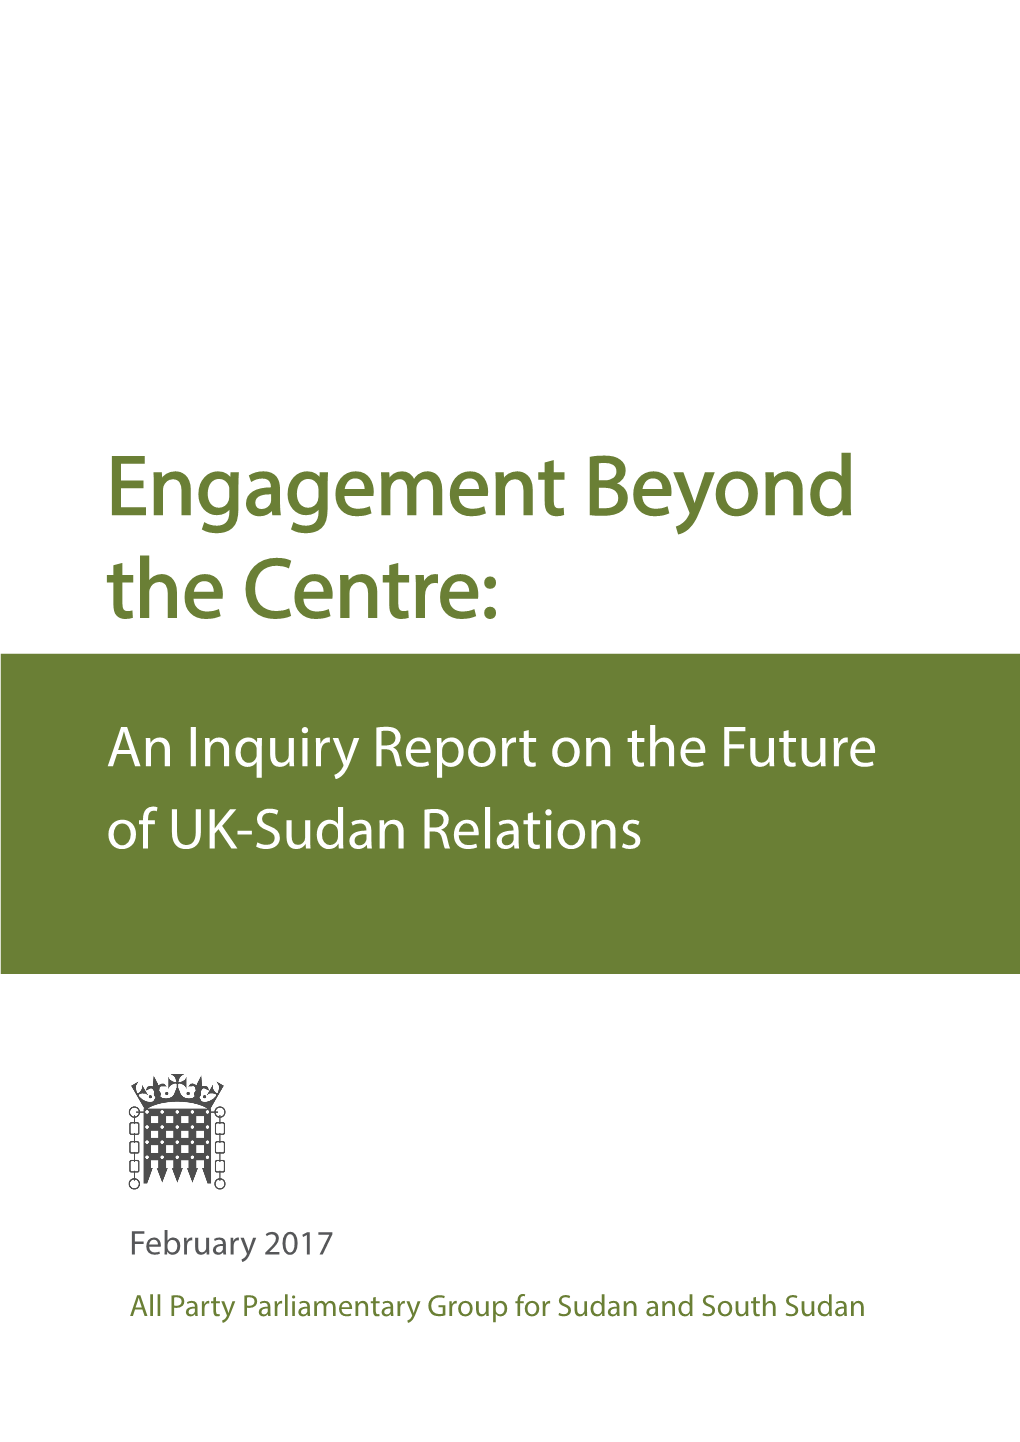 An Inquiry Report on the Future of UK-Sudan Relations